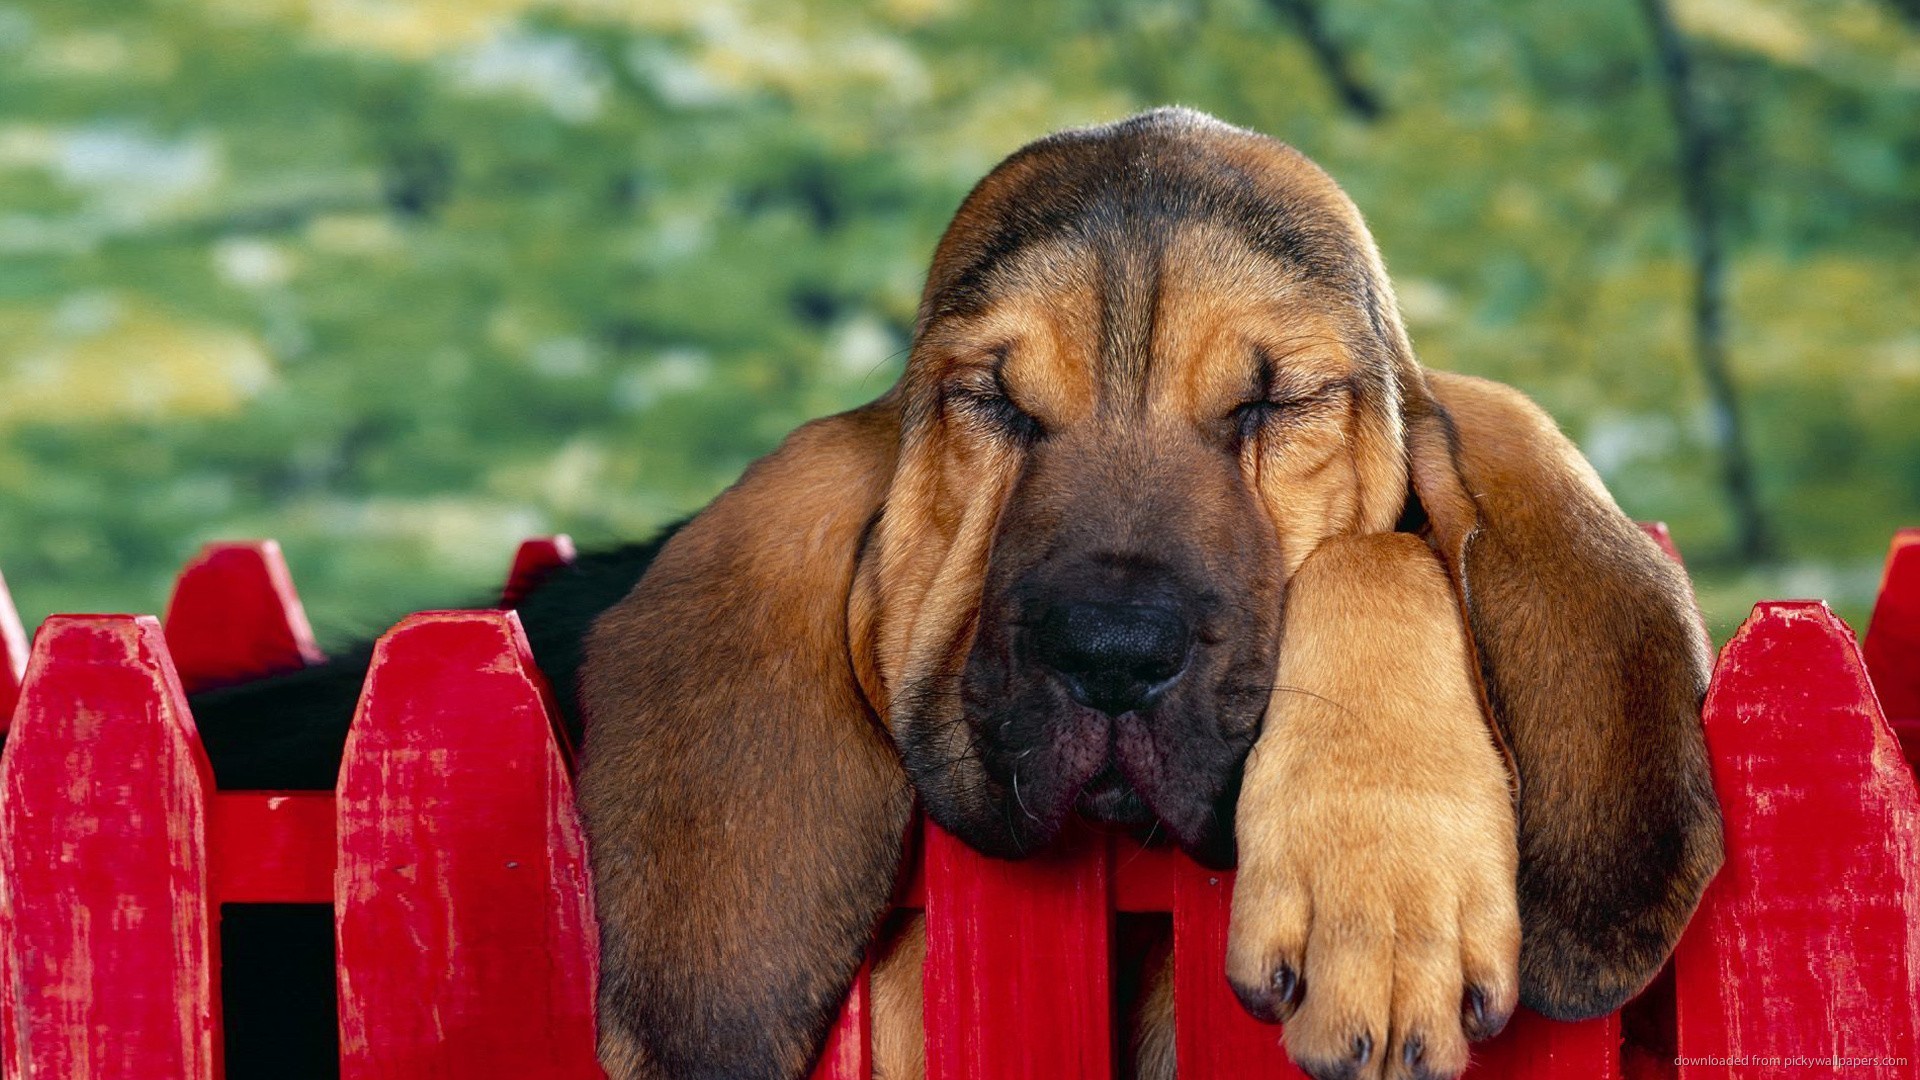 Download 1920x1080 Basset Hound Resting On The Fence Wallpaper